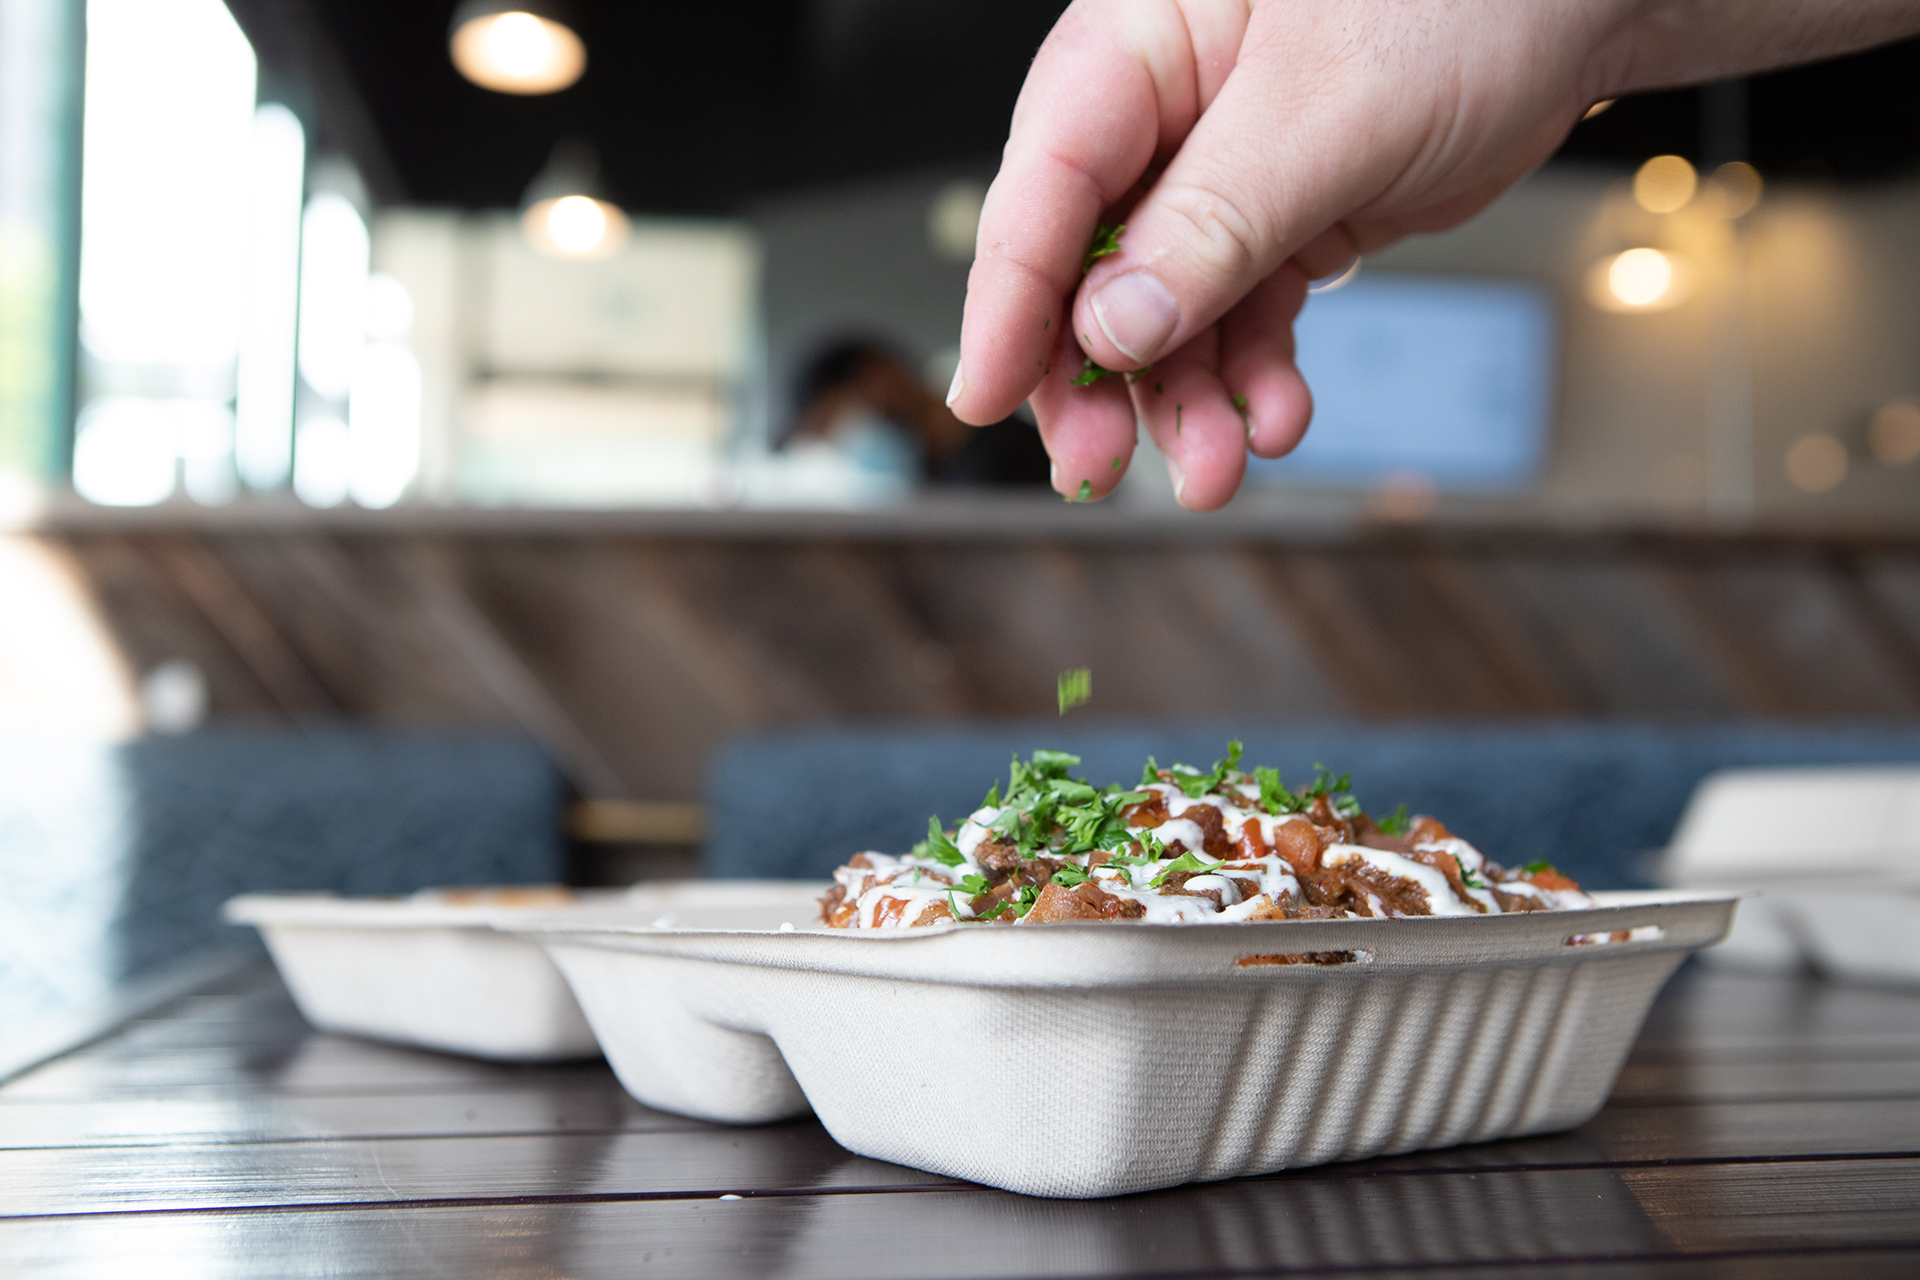 The Chicken Shawarma Nachos plate is pictured from a side profile in the Hummus Labs restaurant. The plate is set on top of a black metalic table with the restaurant's blue cushions and wood booth visible in the background. Chef Joseph Badaro’s hand is shown sprinkling fresh cut parsley over the Shawarma Nachos.